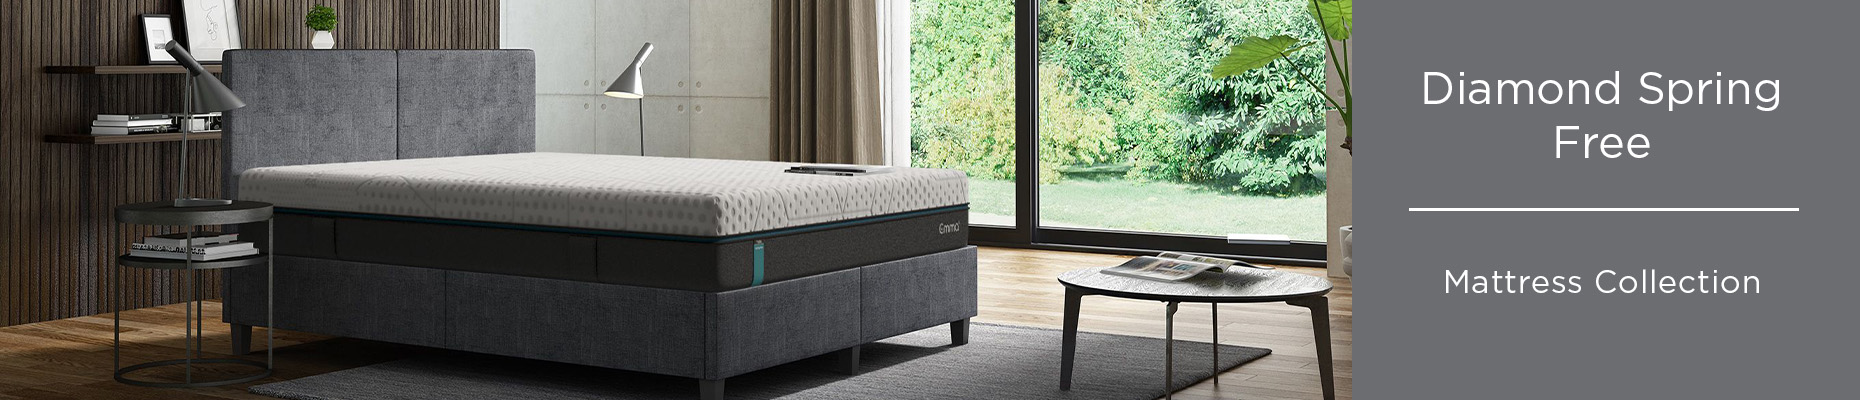 Diamond Spring Free collection from Emma Sleep at Forrest Furnishing